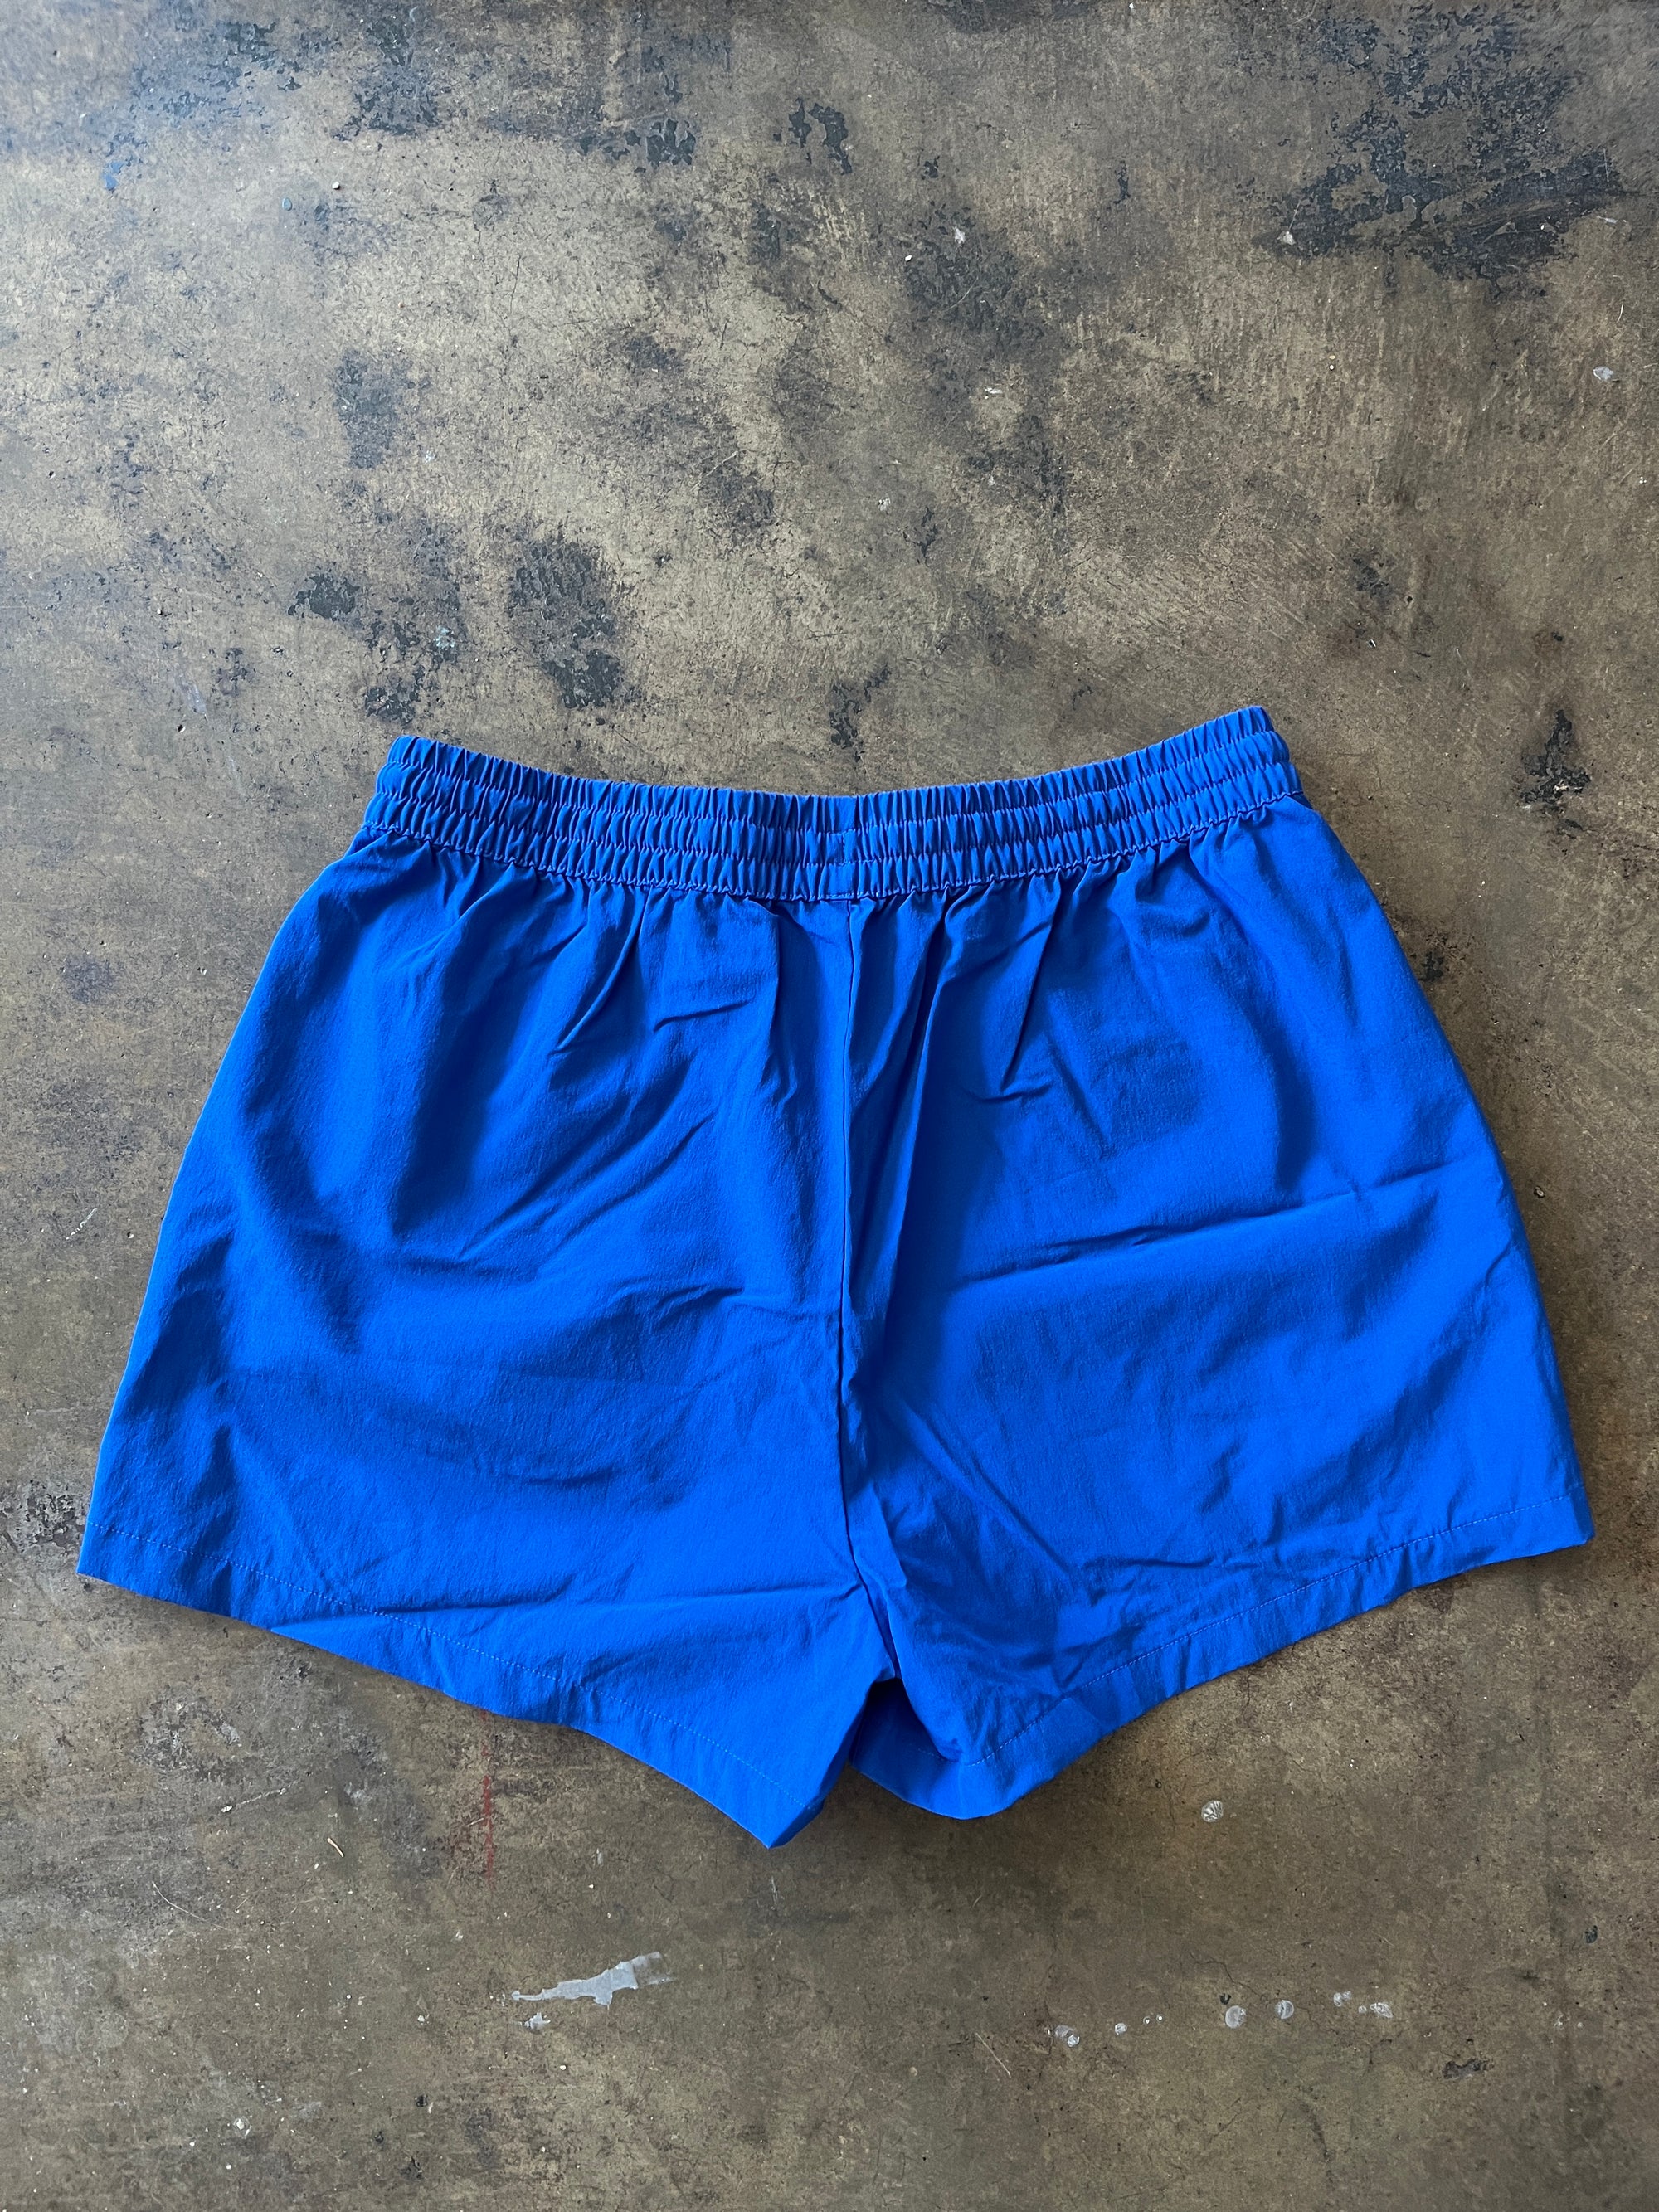 Blue Outdoor Voices Running Shorts